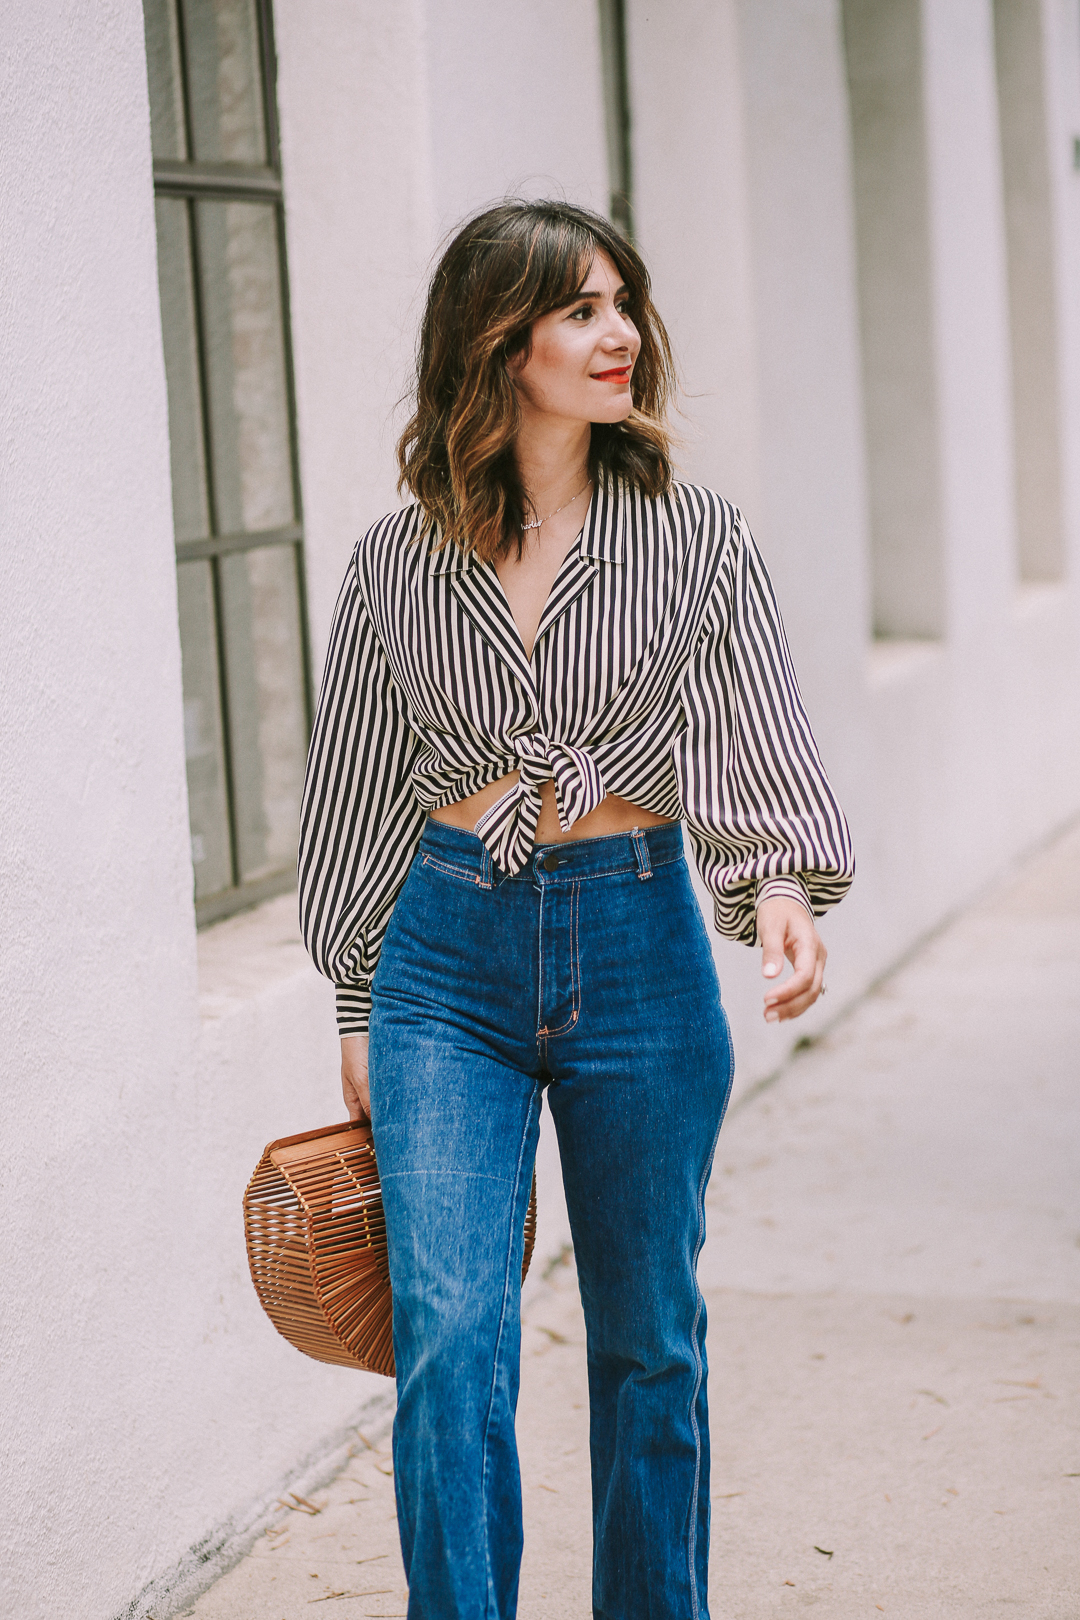 How to Style High Waist Jeans Outfit Ideas for Fall